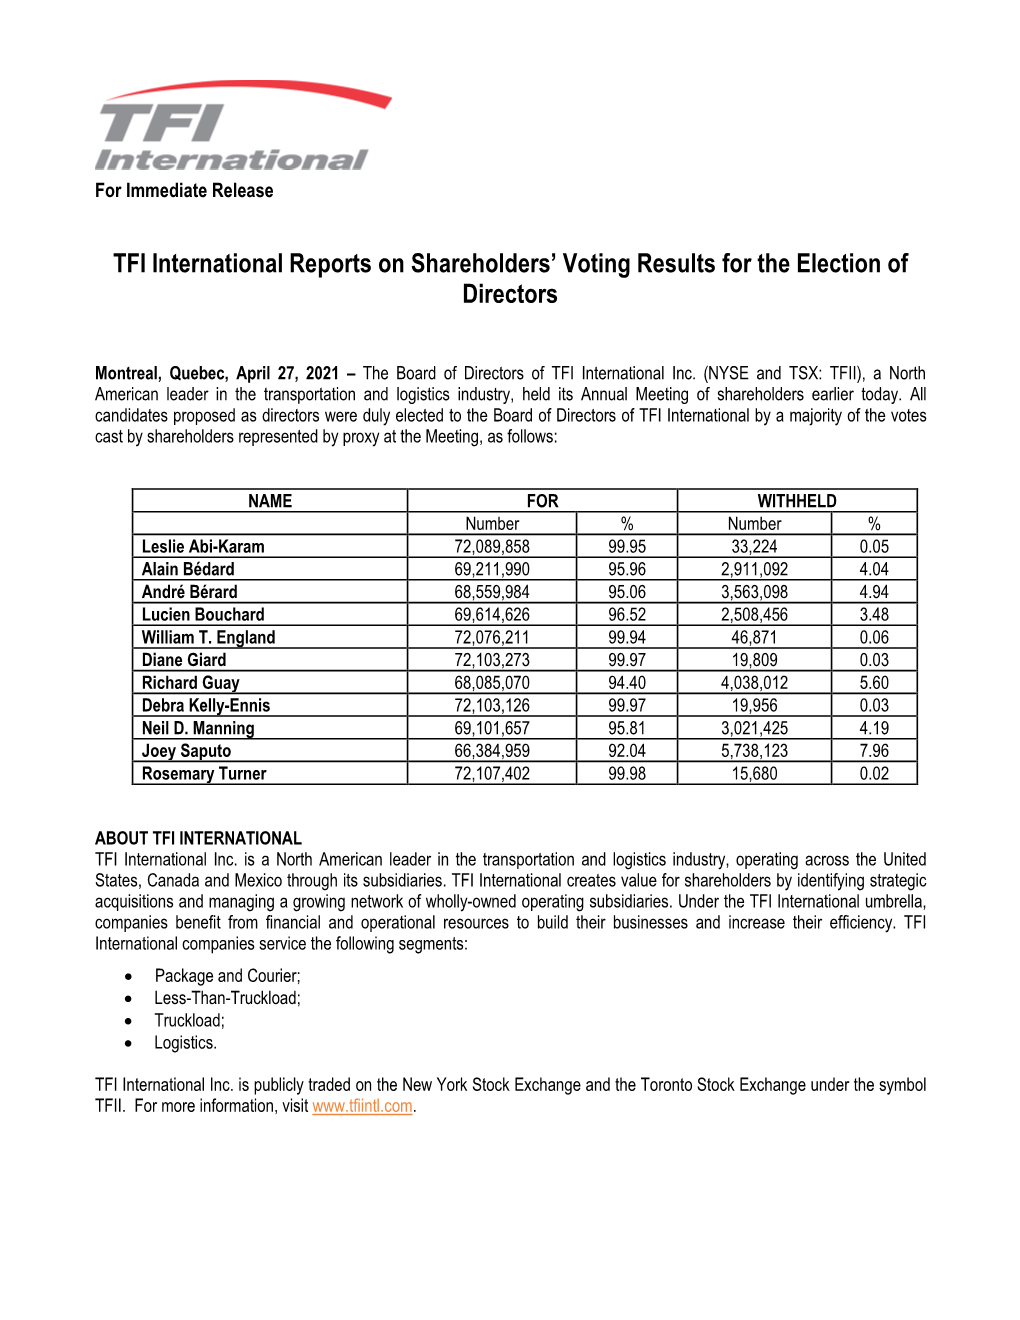 TFI International Reports on Shareholders' Voting Results for The